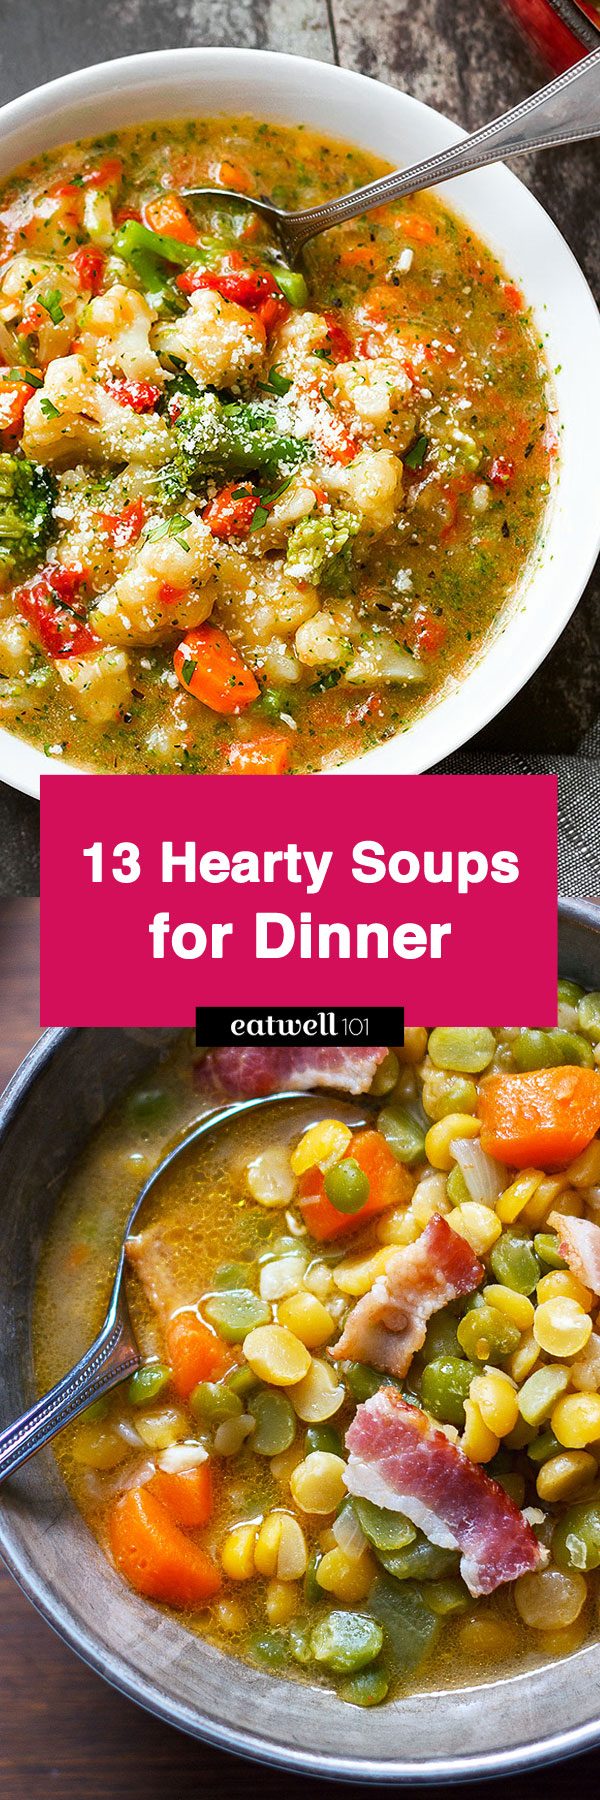 Soup Recipes: 13 Hearty Soup Recipes for Dinner — Eatwell101